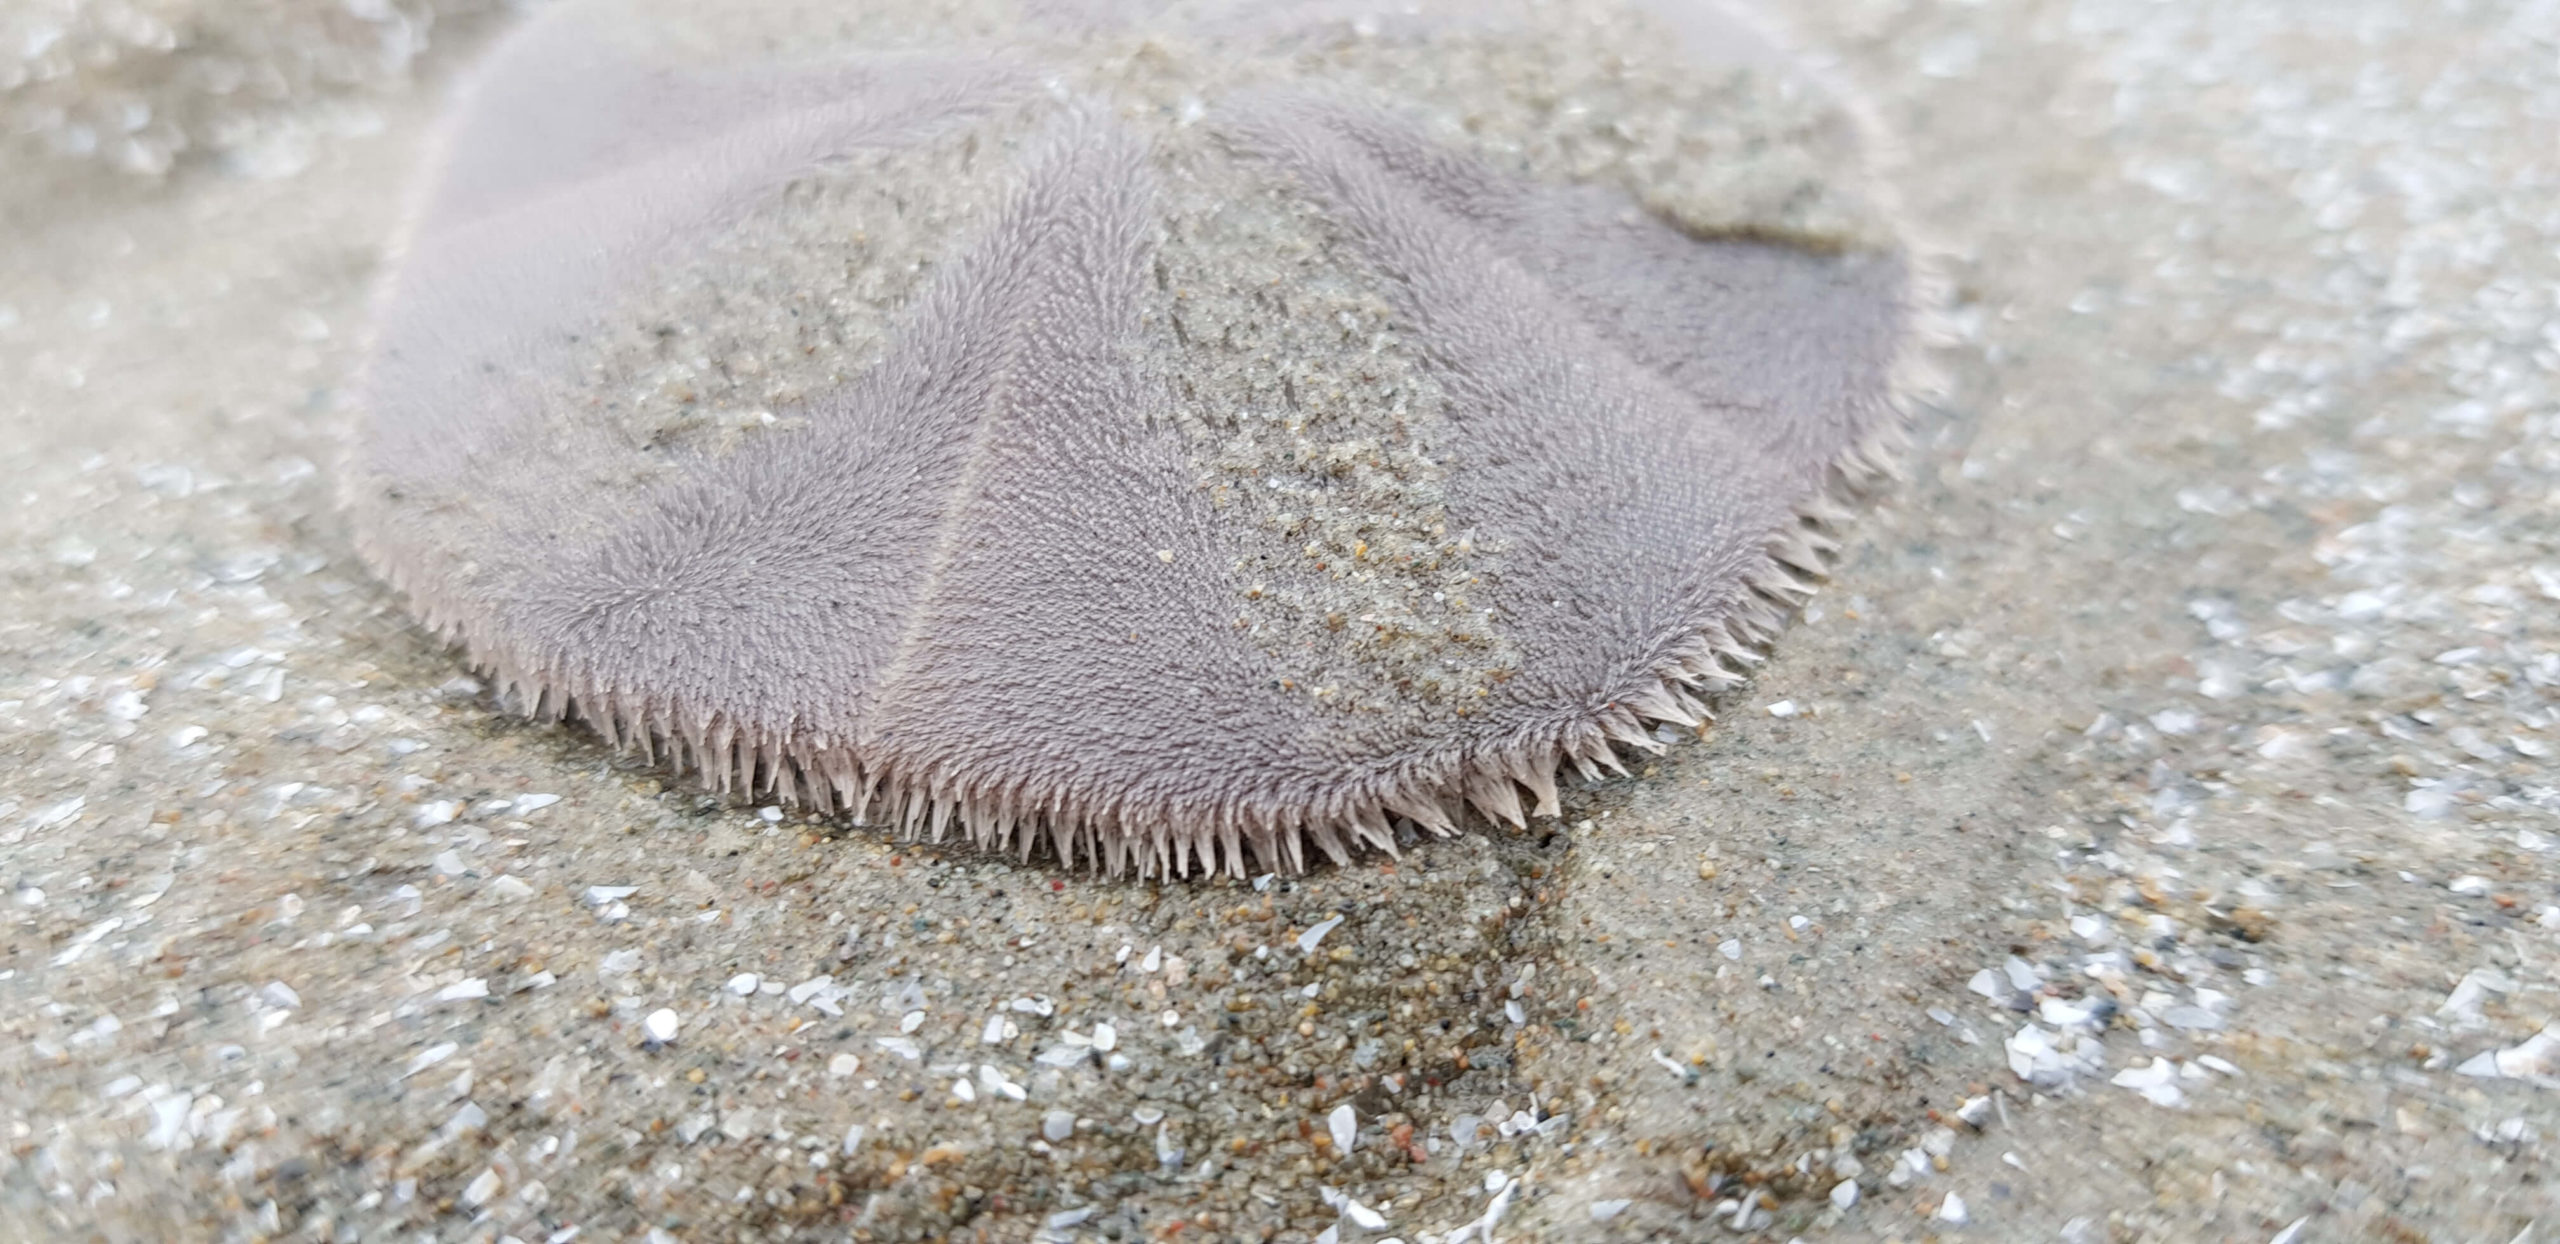 Skin colored sand dollar in sand